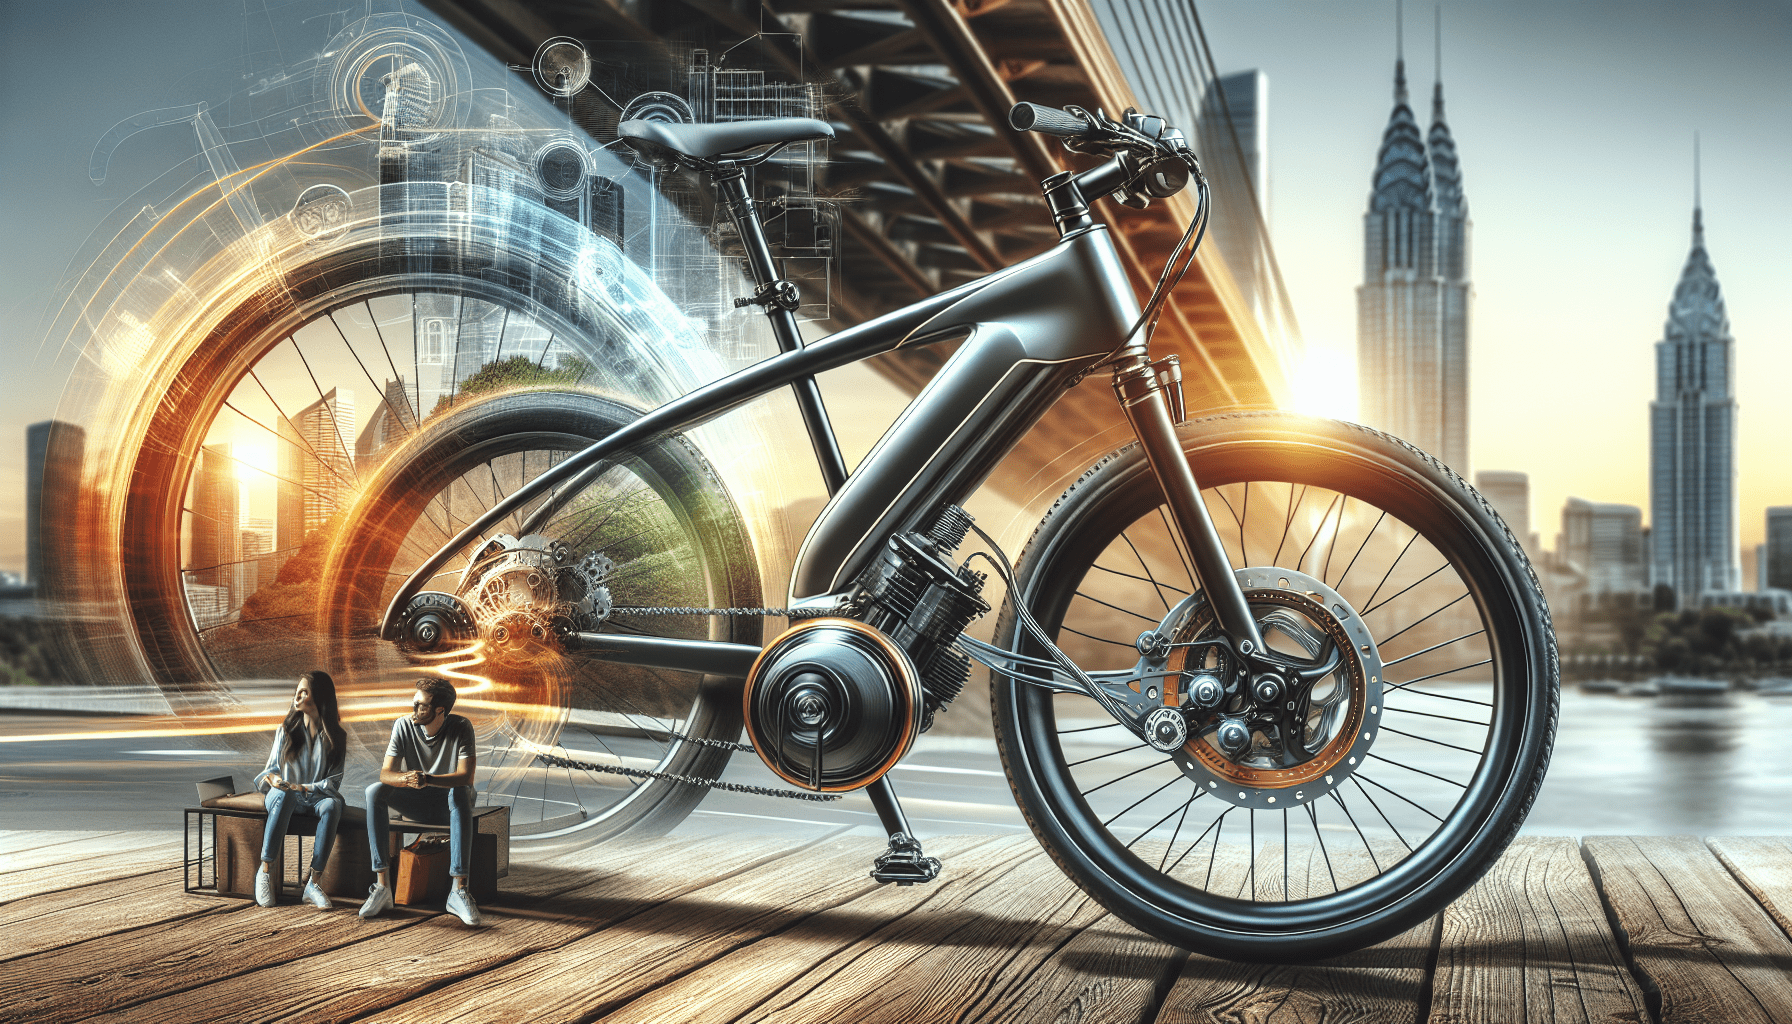 Do You Have To Constantly Pedal An Electric Bike?